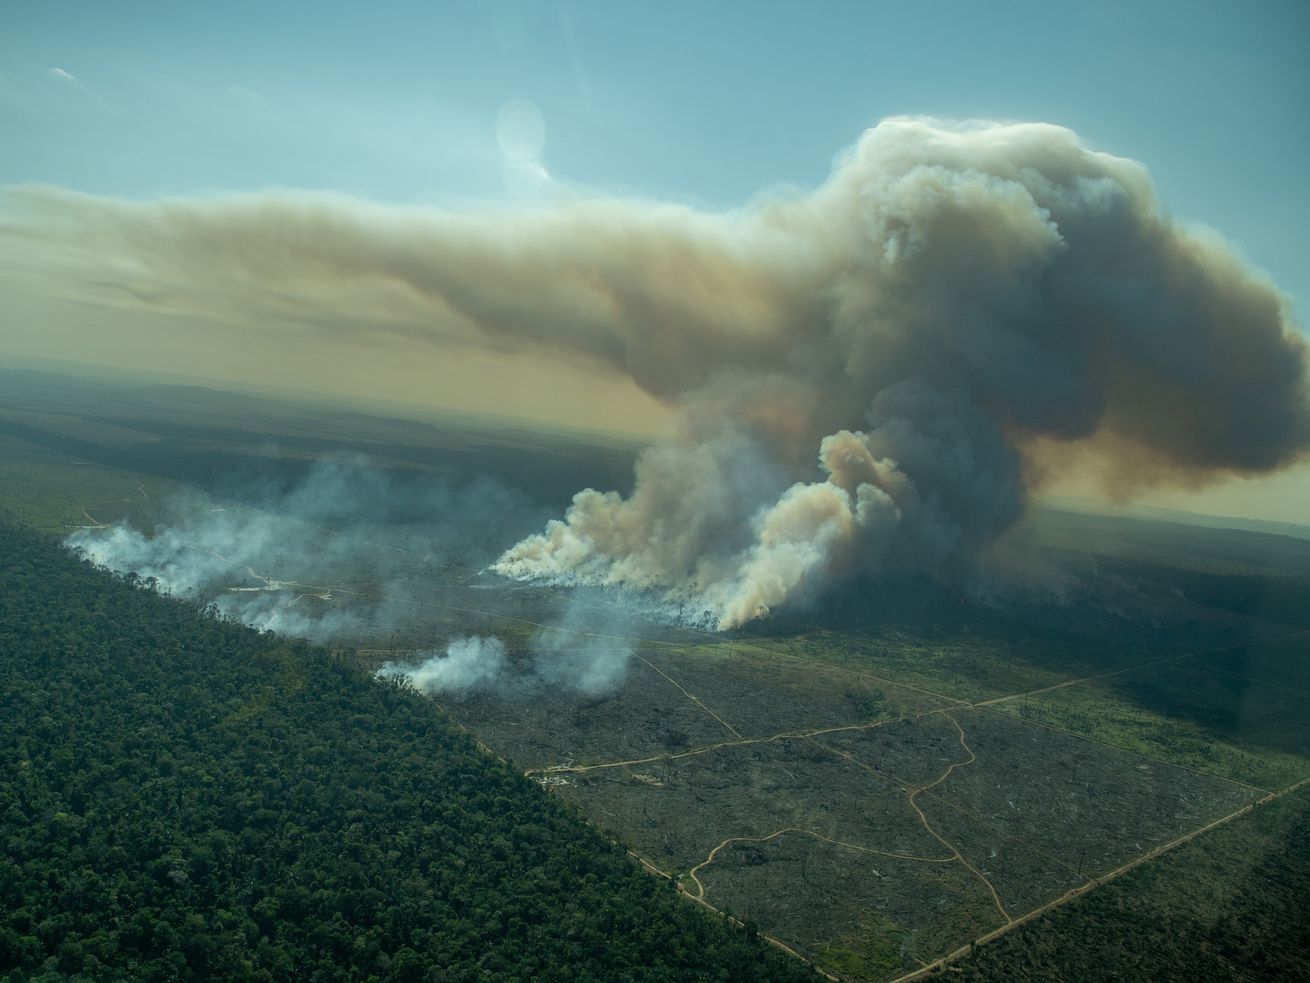 Fires in the Amazon are out of control. Again.